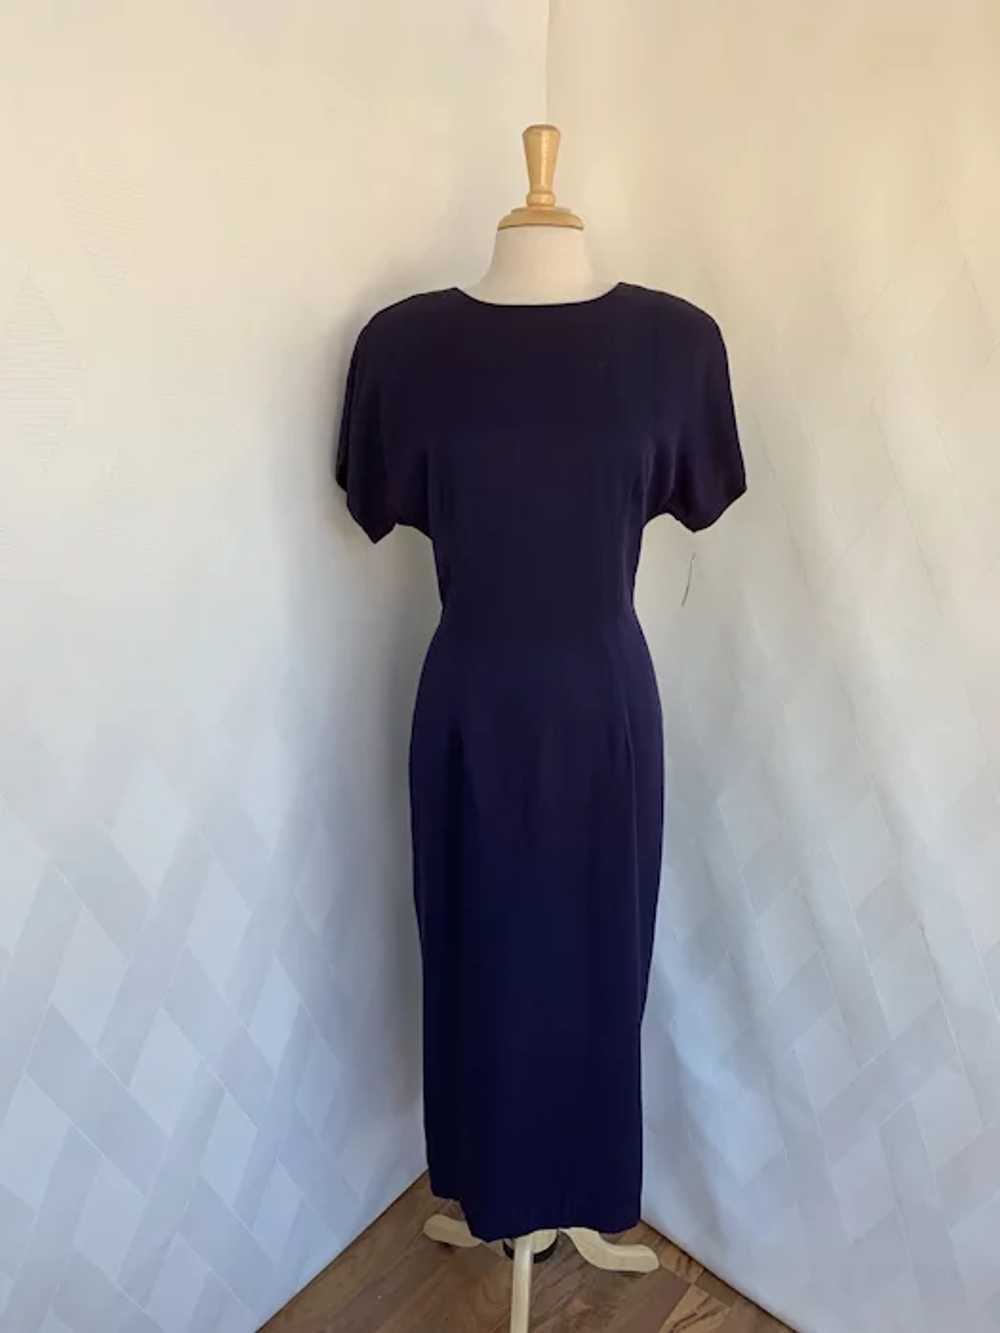 Datiani Vintage 1980s Navy and White Cocktail Dre… - image 2